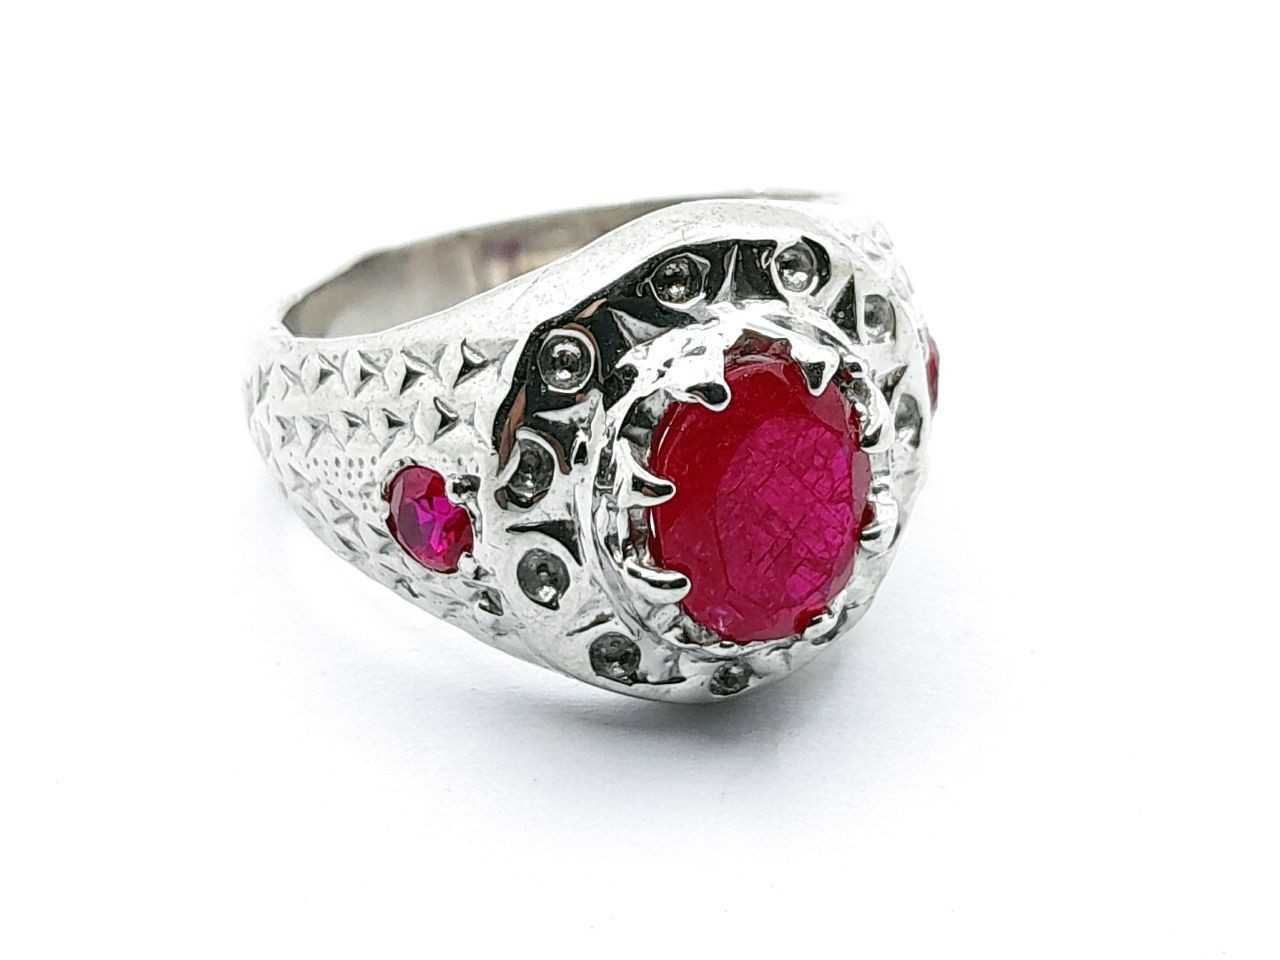 Silver ring with a ruby stone